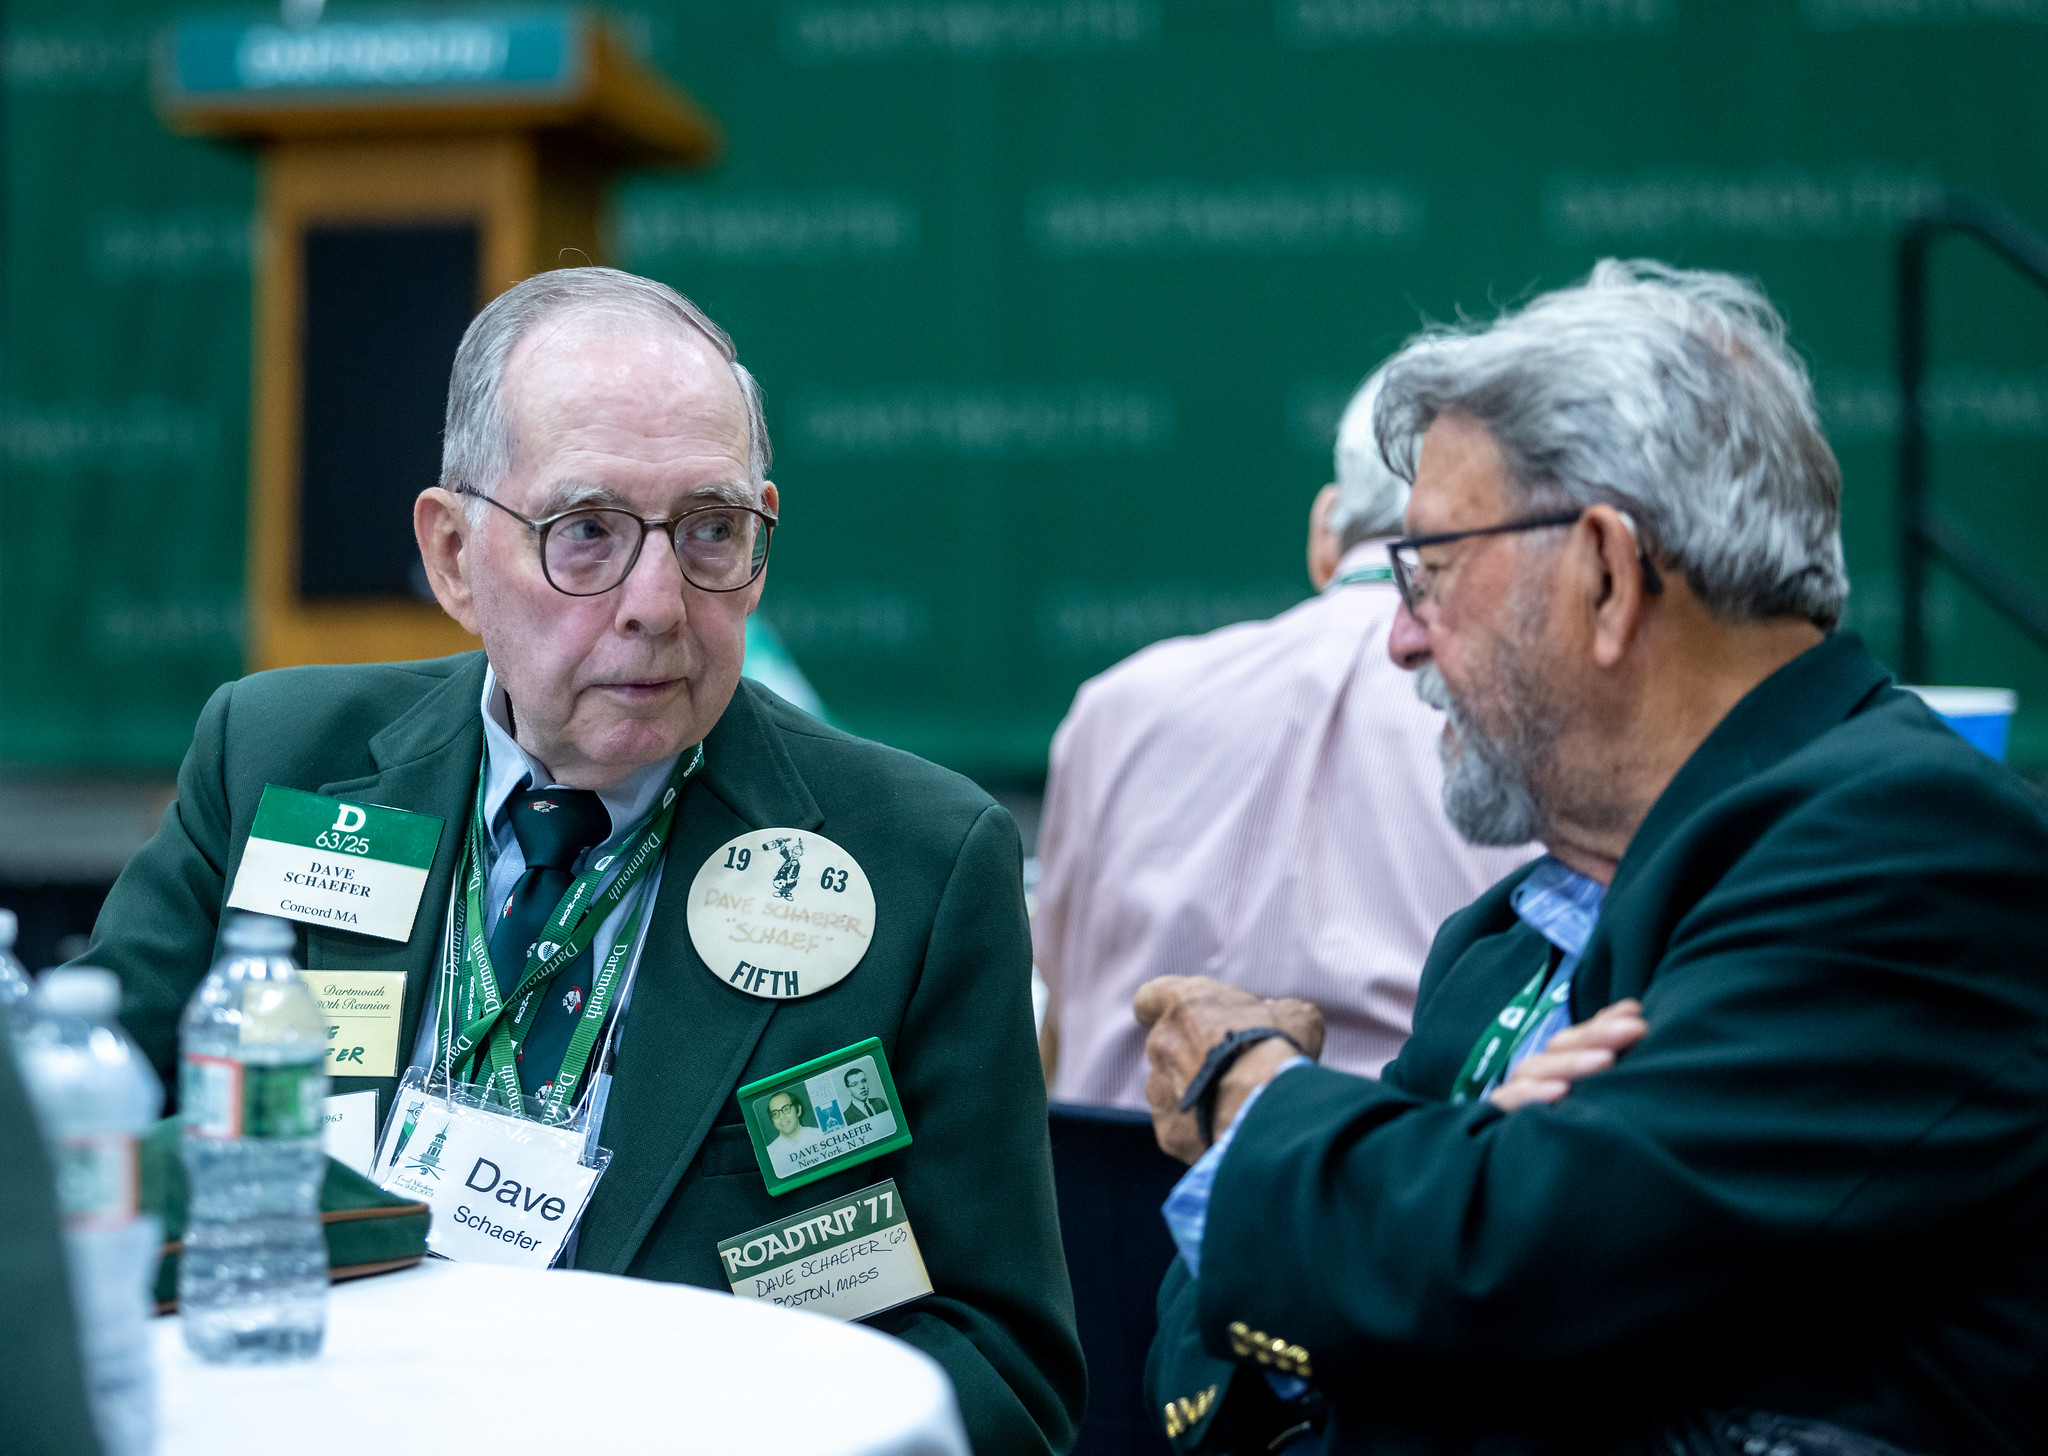 Class of 63 member wearing many different name tags